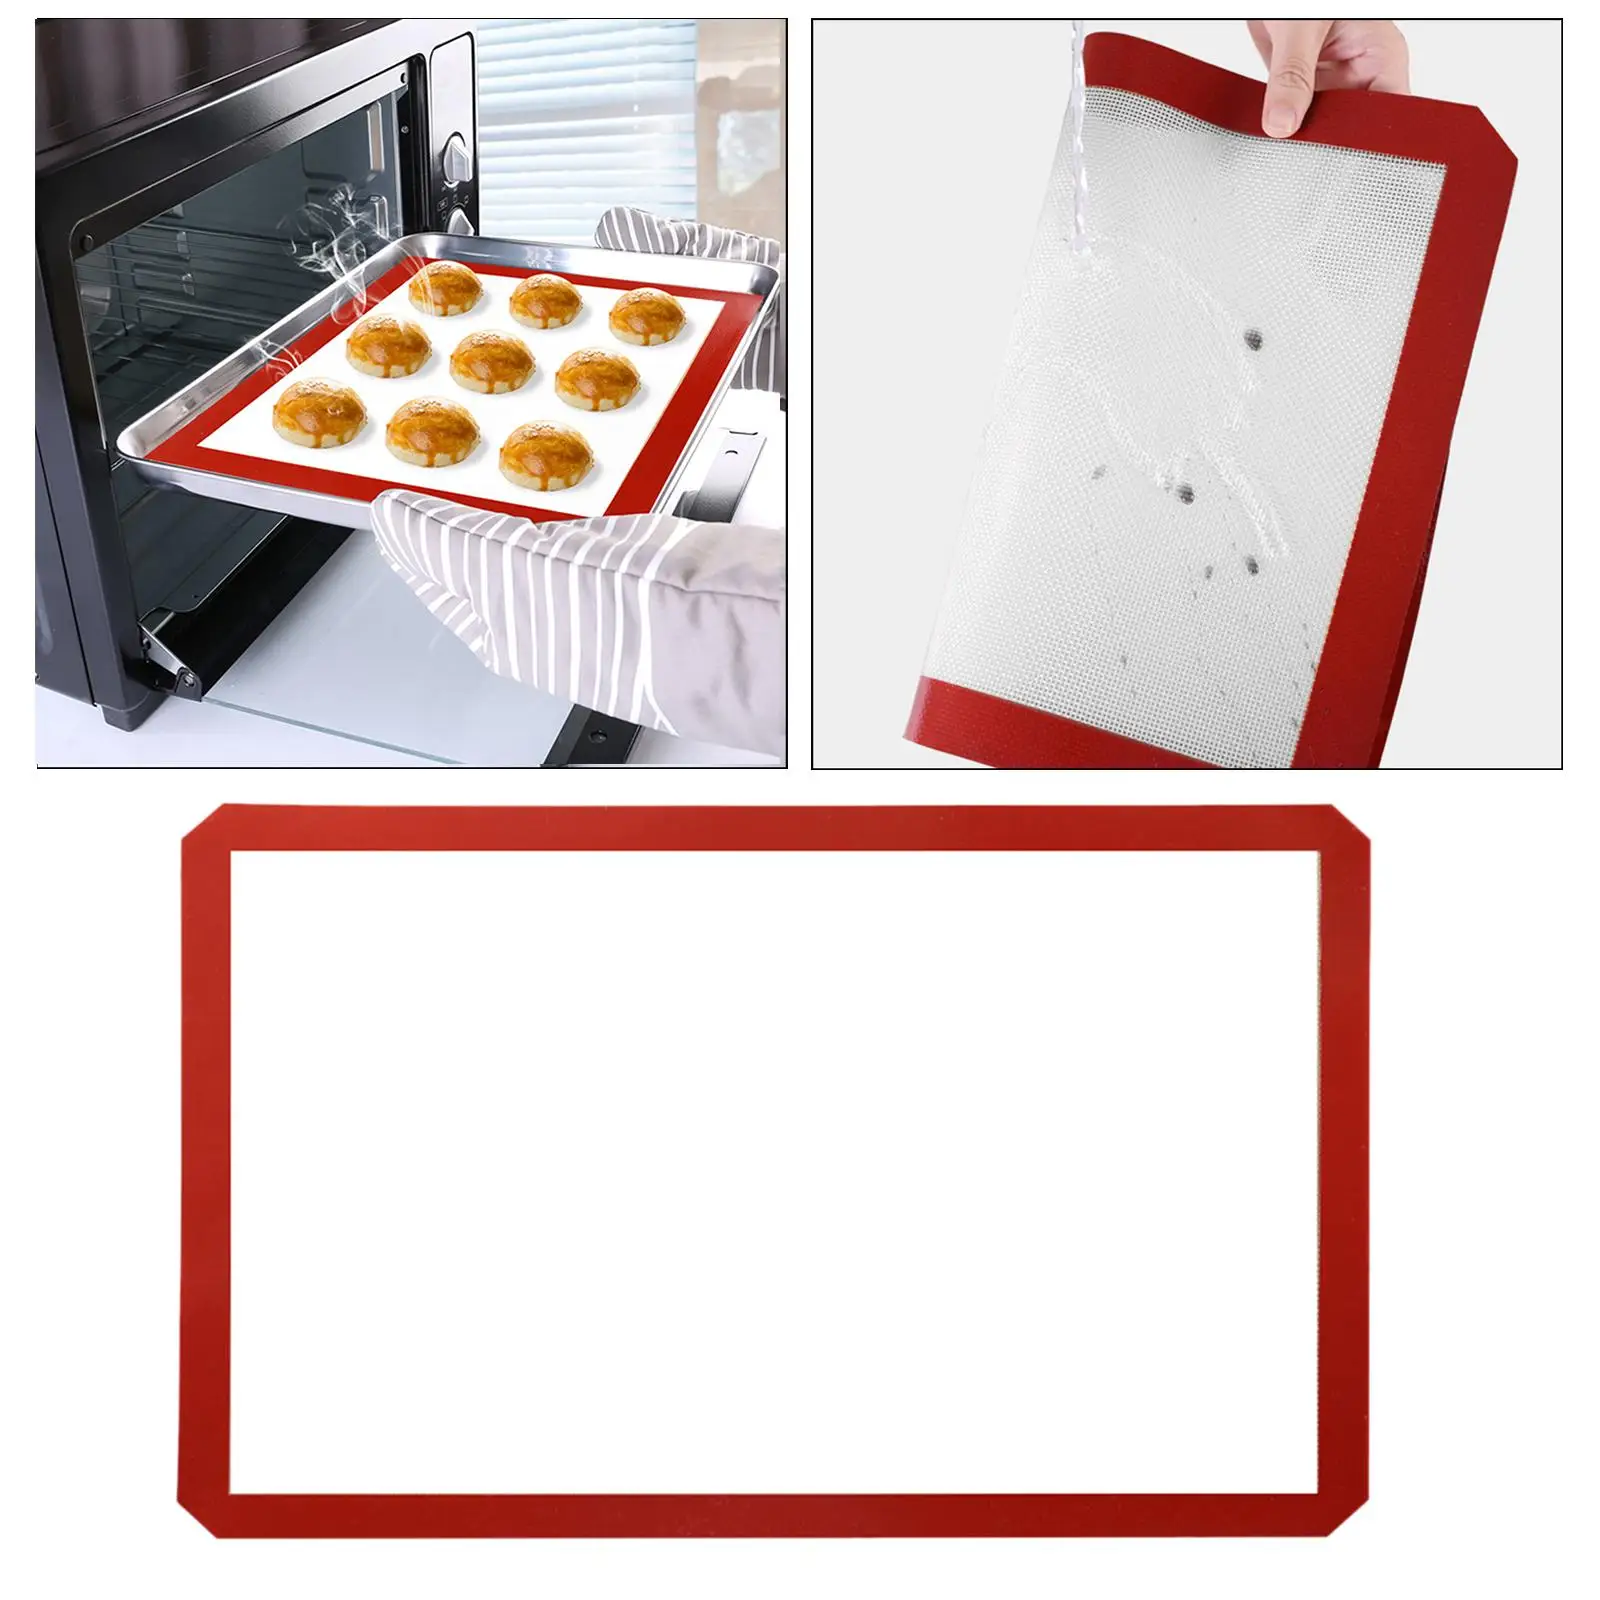 Household Silicone Baking Mat Oven Liner Non Stick Heat Resistant Reusable Pad Sheet for Bake Pans & Rolling Macaron Meats Bun